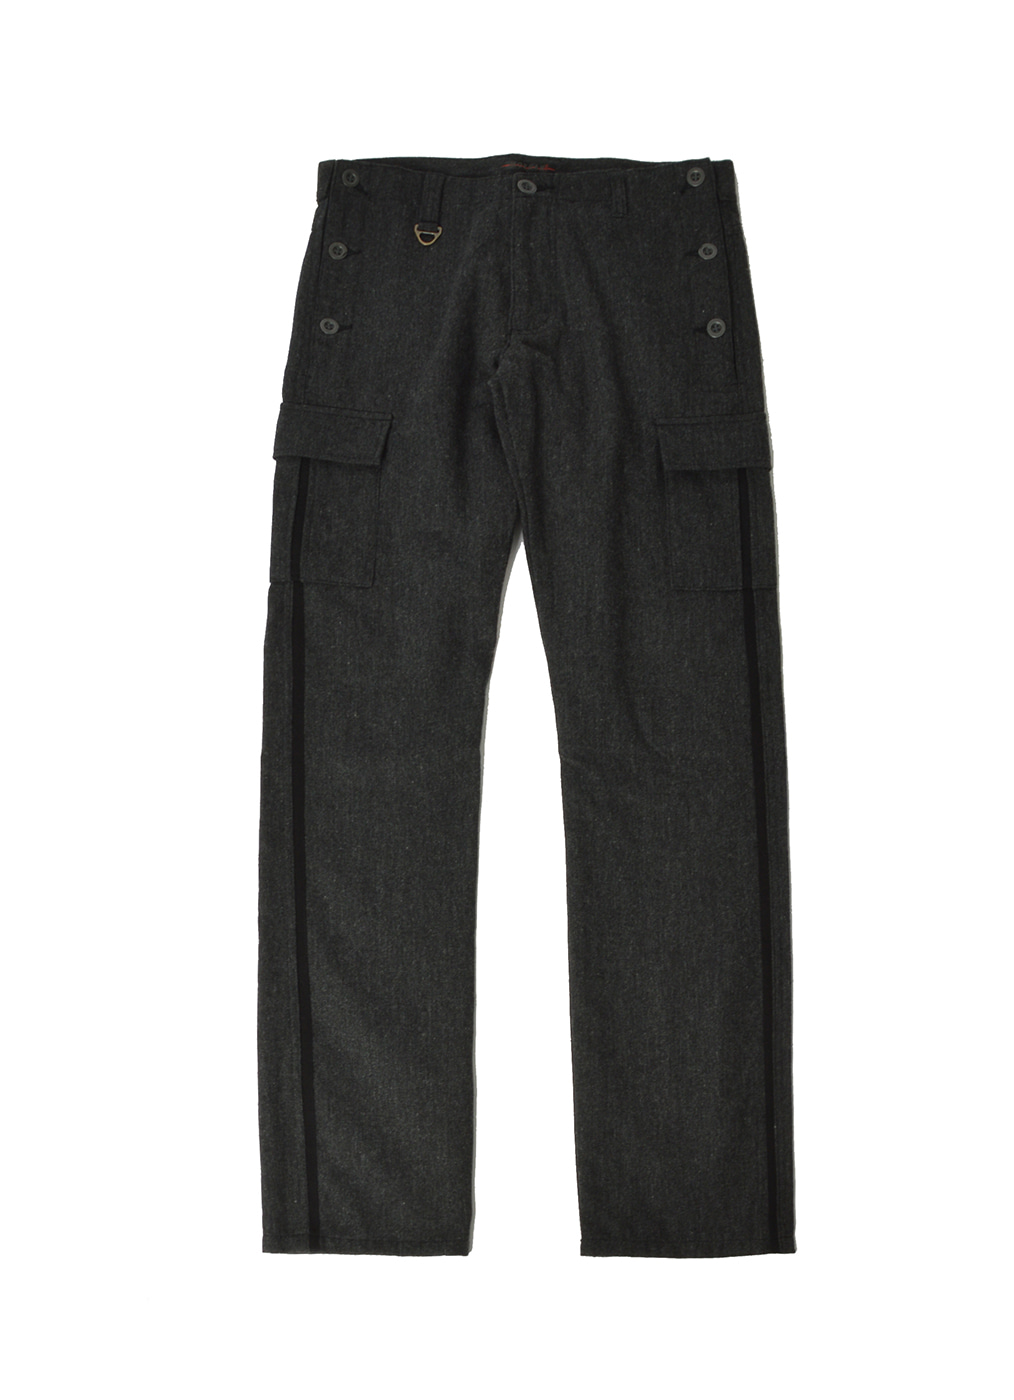 (Made in JAPAN) MORGAN homme cargo pants